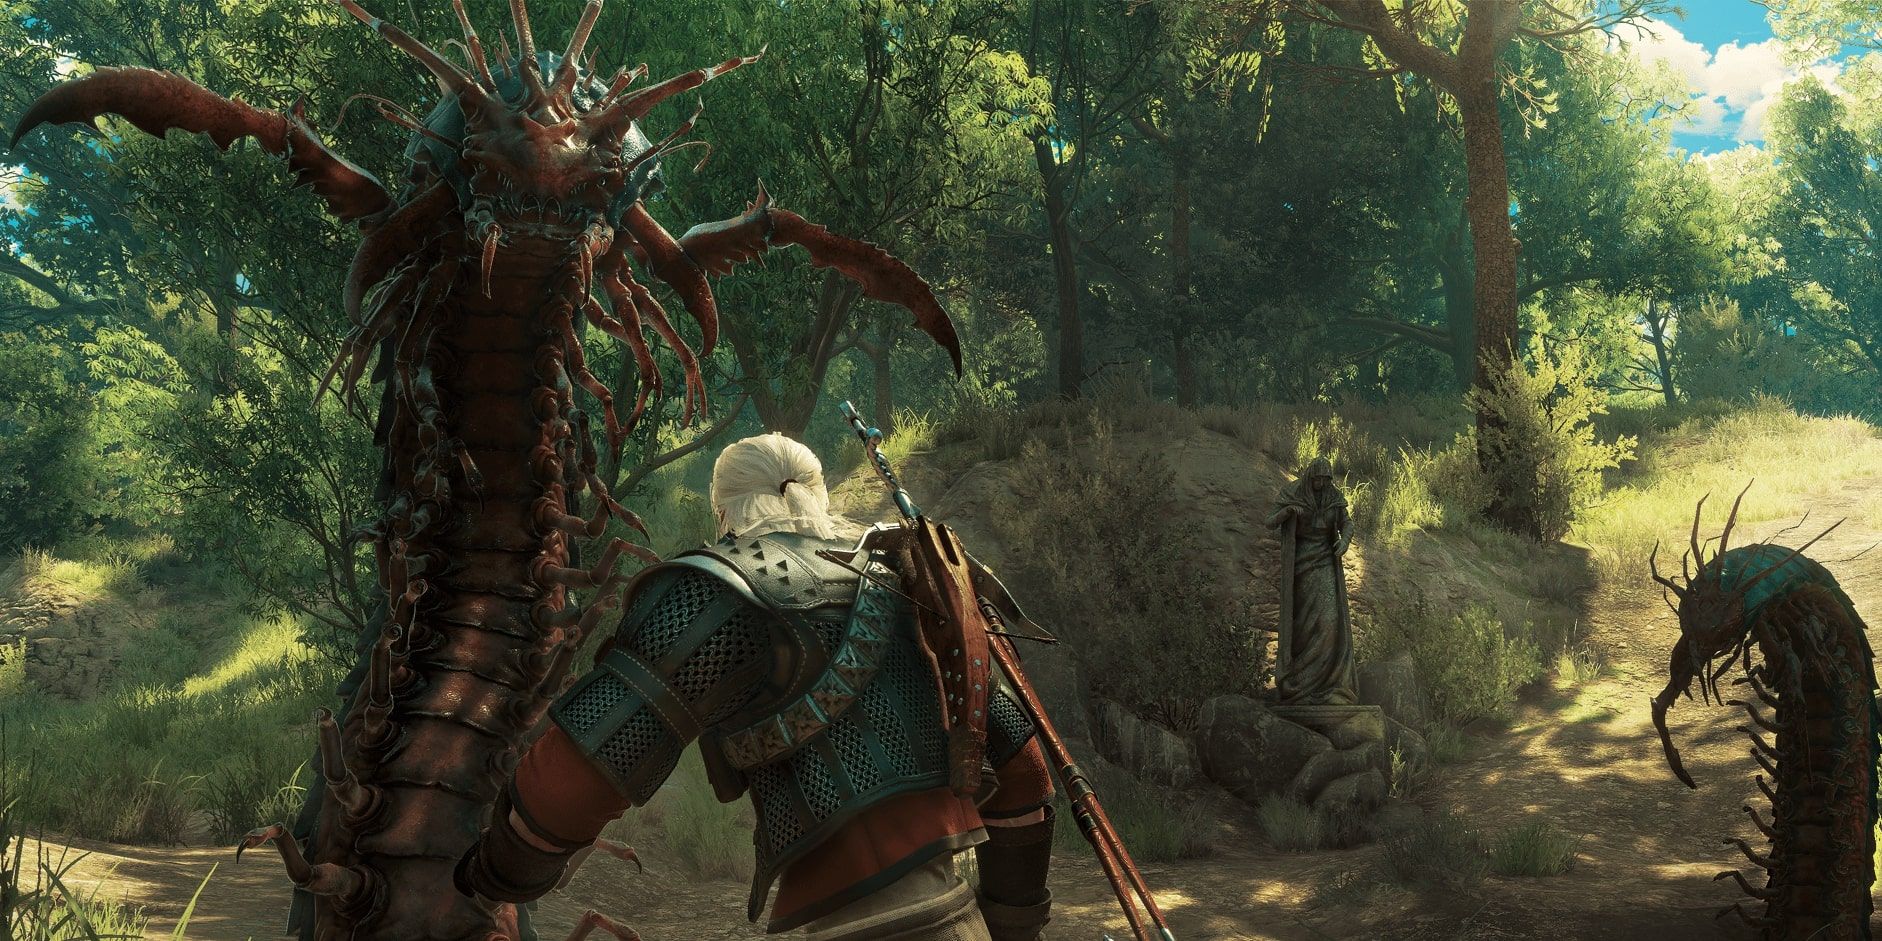 Geralt faces a horde of large centipede creatures that emerge from the ground near a forest patch.